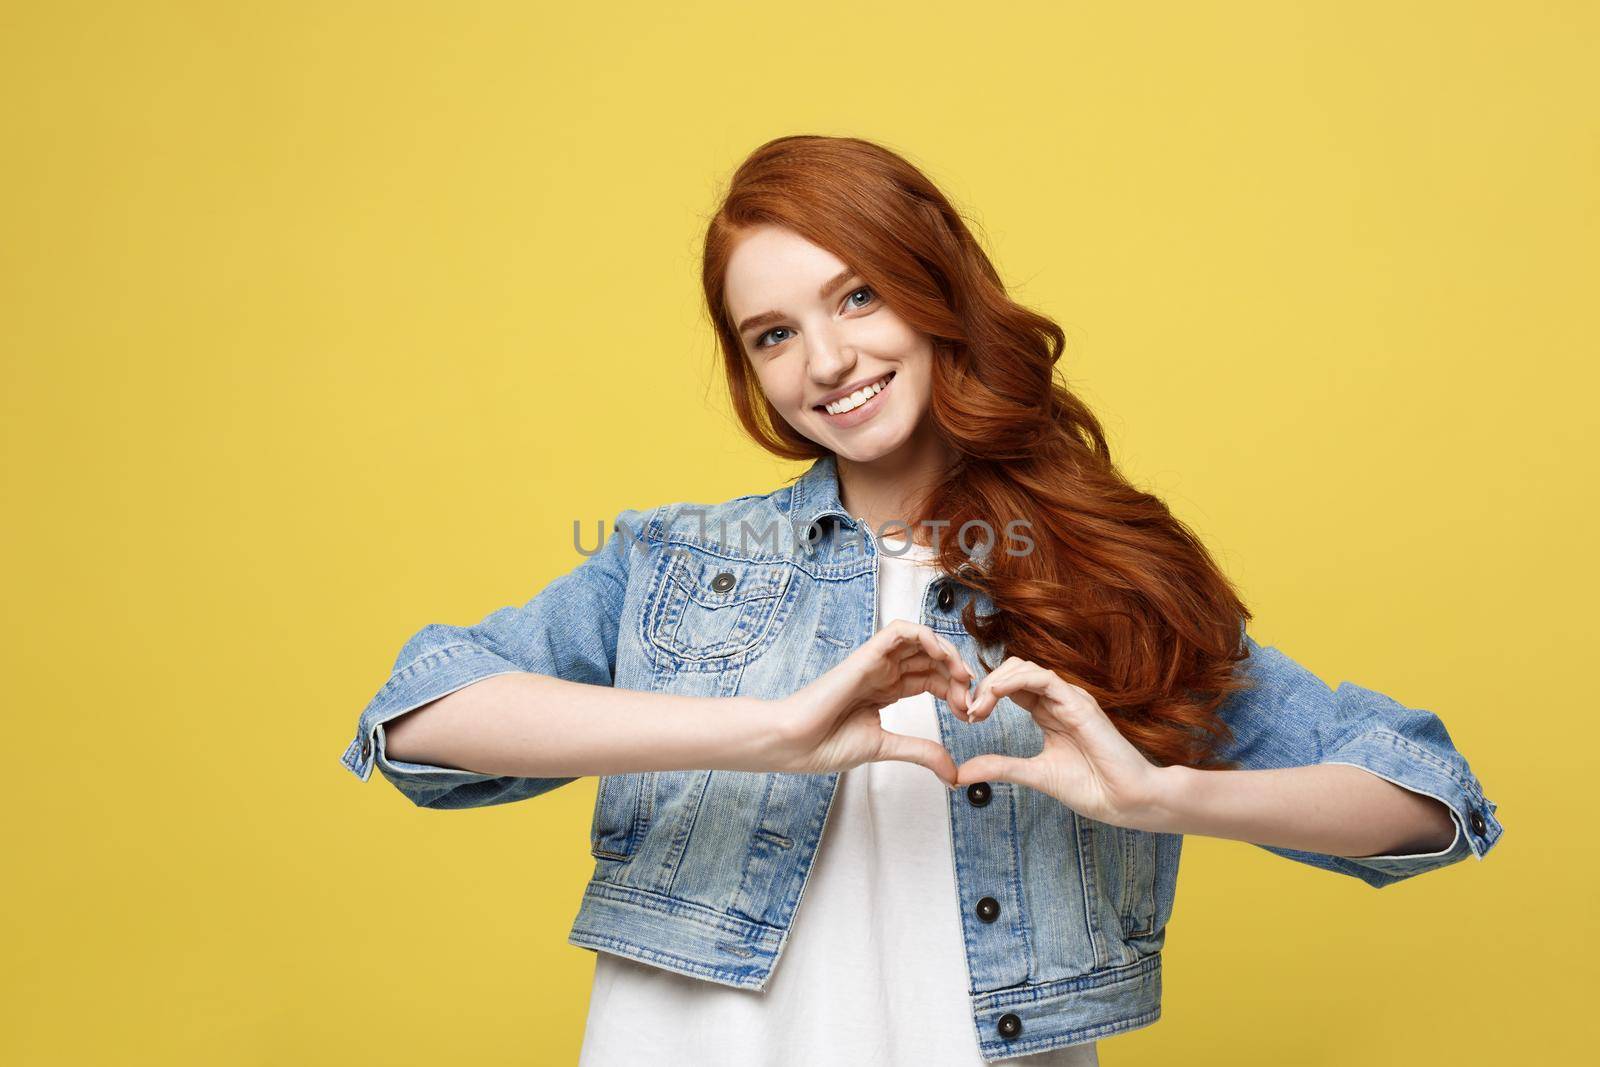 Lifestyle Concept: Beautiful attractive woman in denim making a heart symbol with her hands.